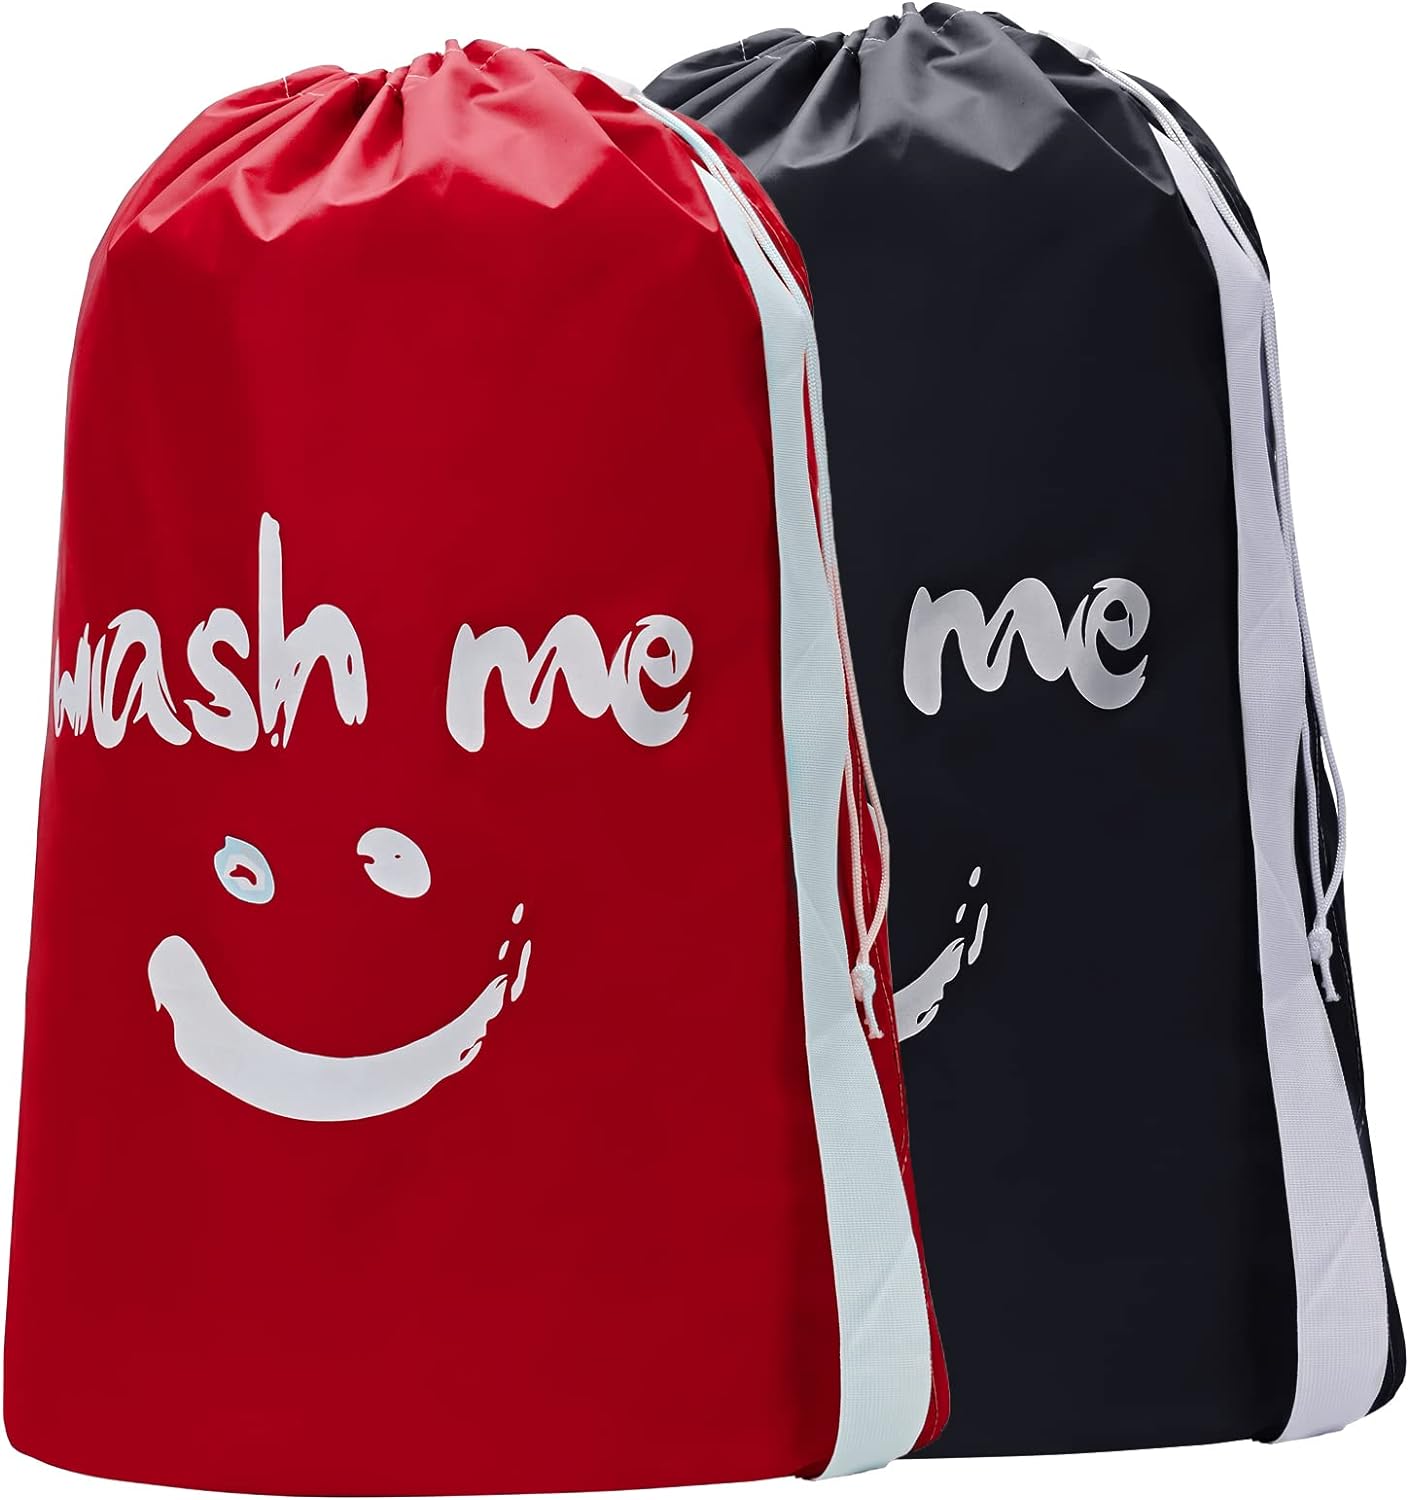 HOMEST 2 Pack XL Wash Me Travel Laundry Bag, Dirty Clothes Organizer, Large Enough to Hold 4 Loads of Laundry, Easy Fit a Laundry Hamper or Basket